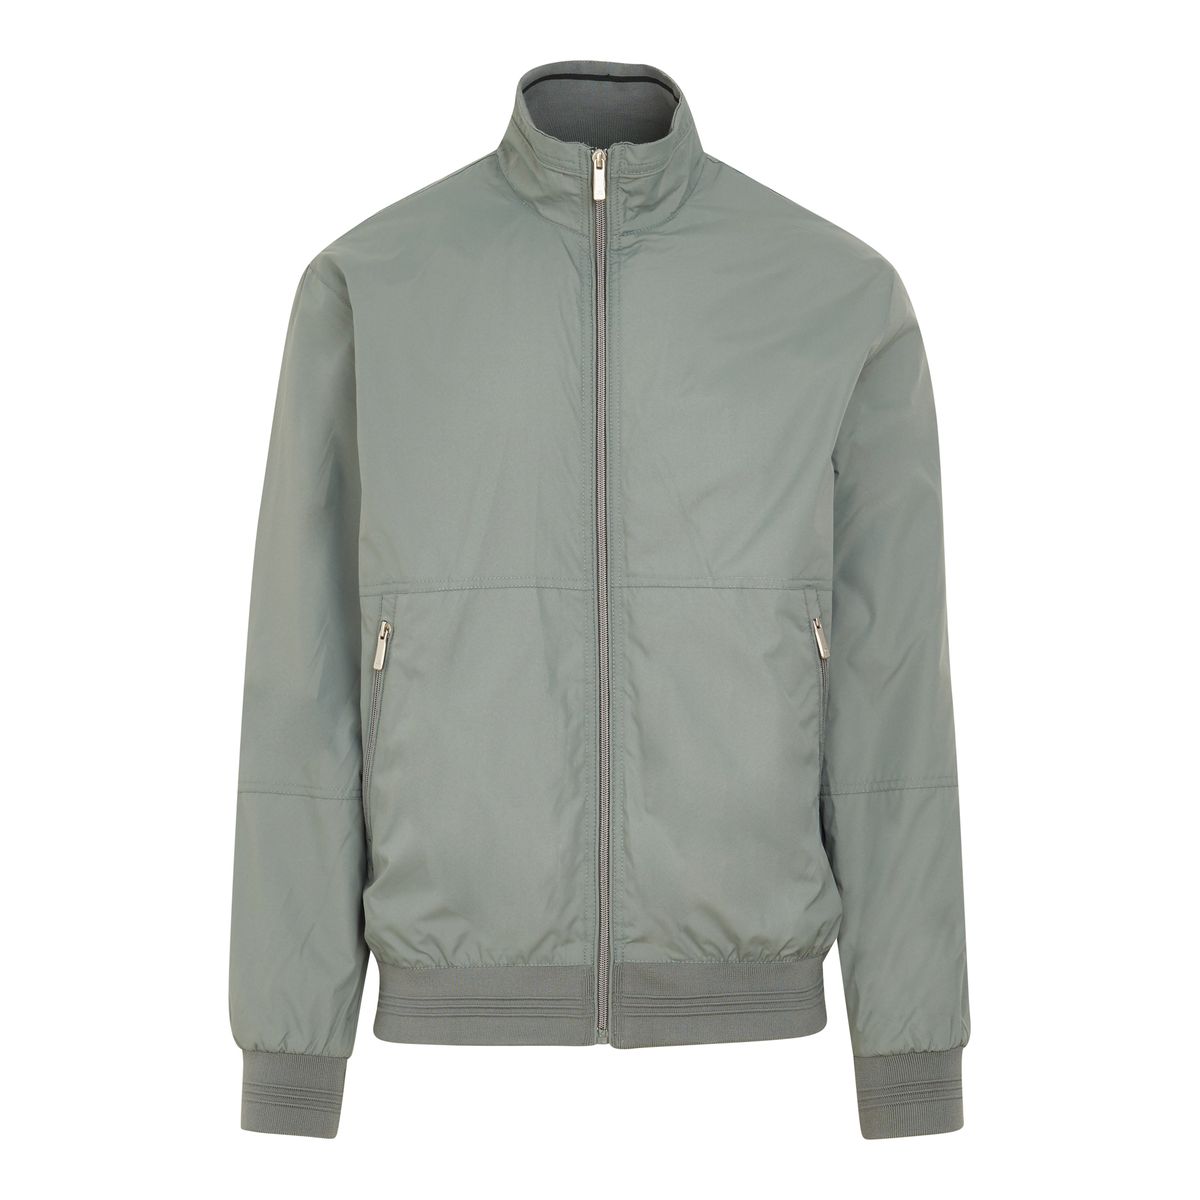 Jonathan D Olympus Jacket - Mens Zip-Up Shell | Shop Today. Get it ...